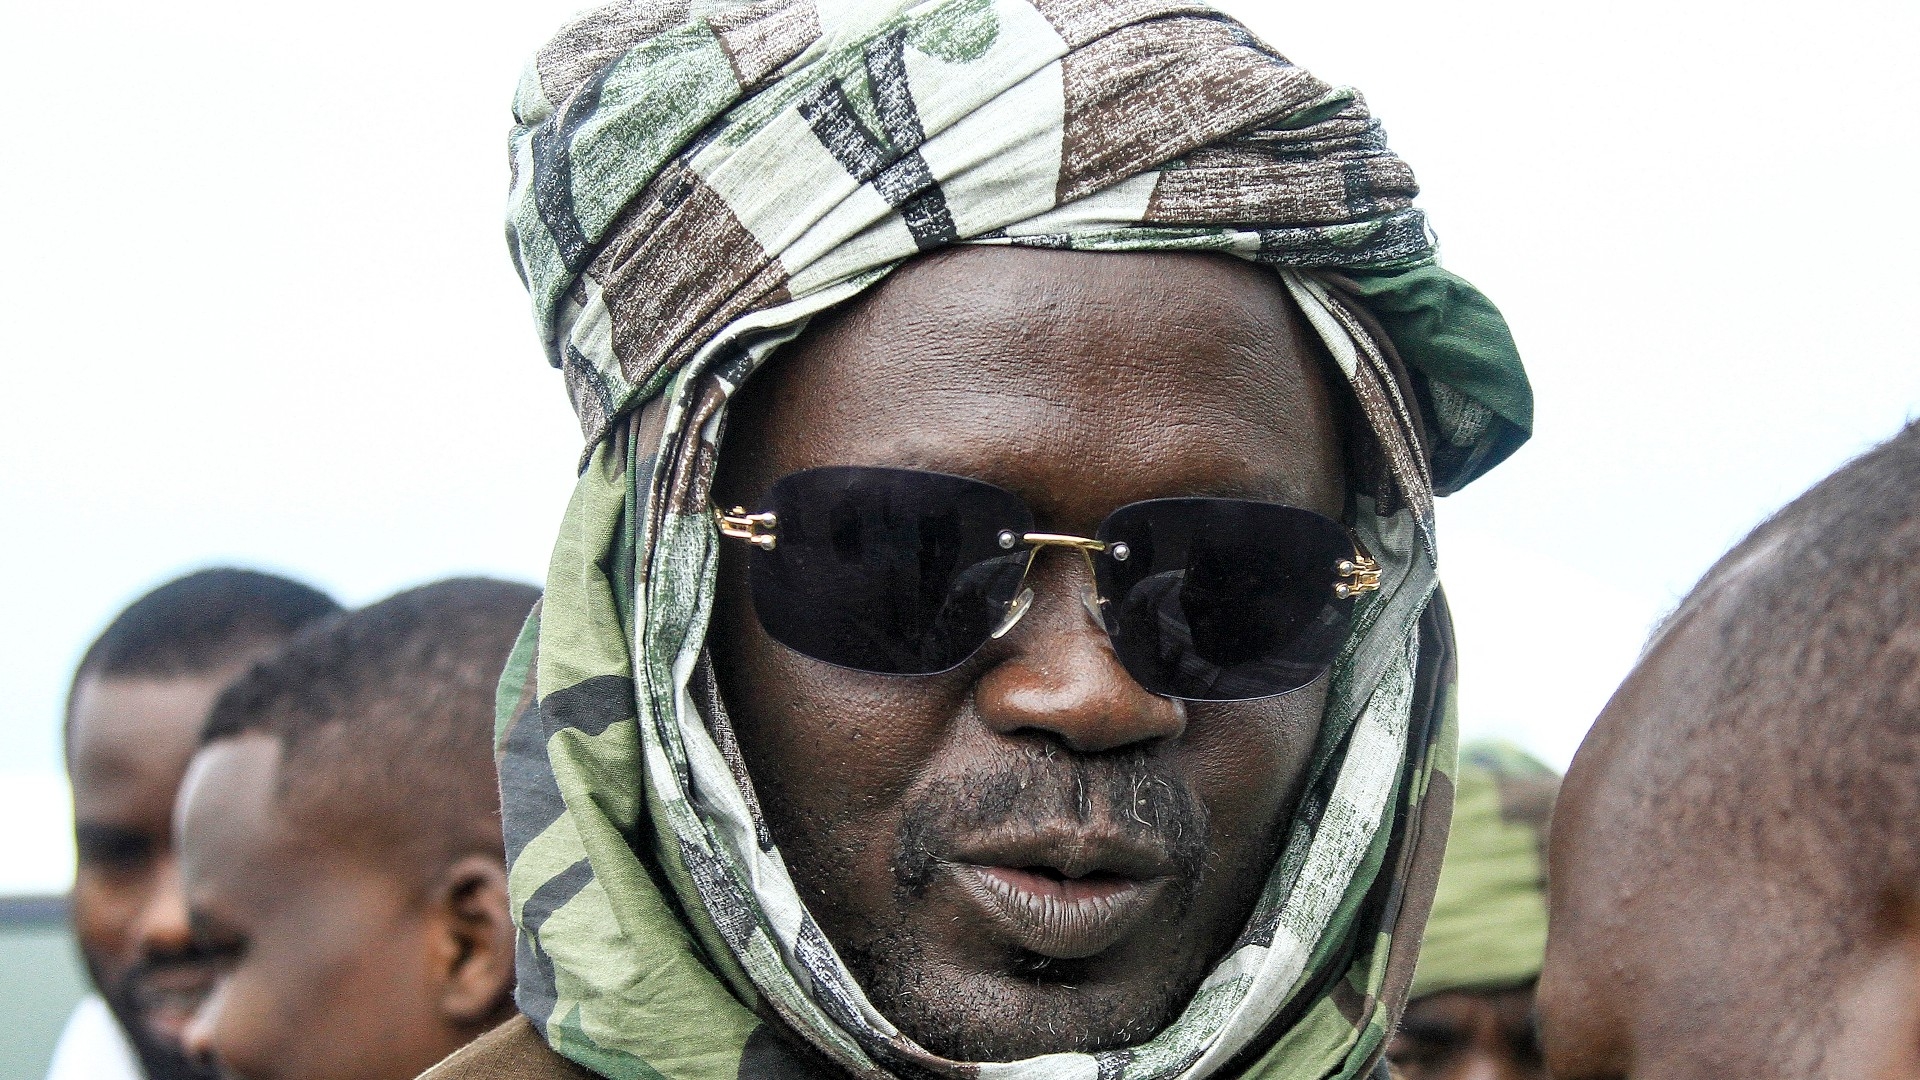 Minni Minnawi, governor of Sudan's Darfur, looks on during a stopover in the eastern city of Gedaref while on his way to Port Sudan on 30 August (AFP)